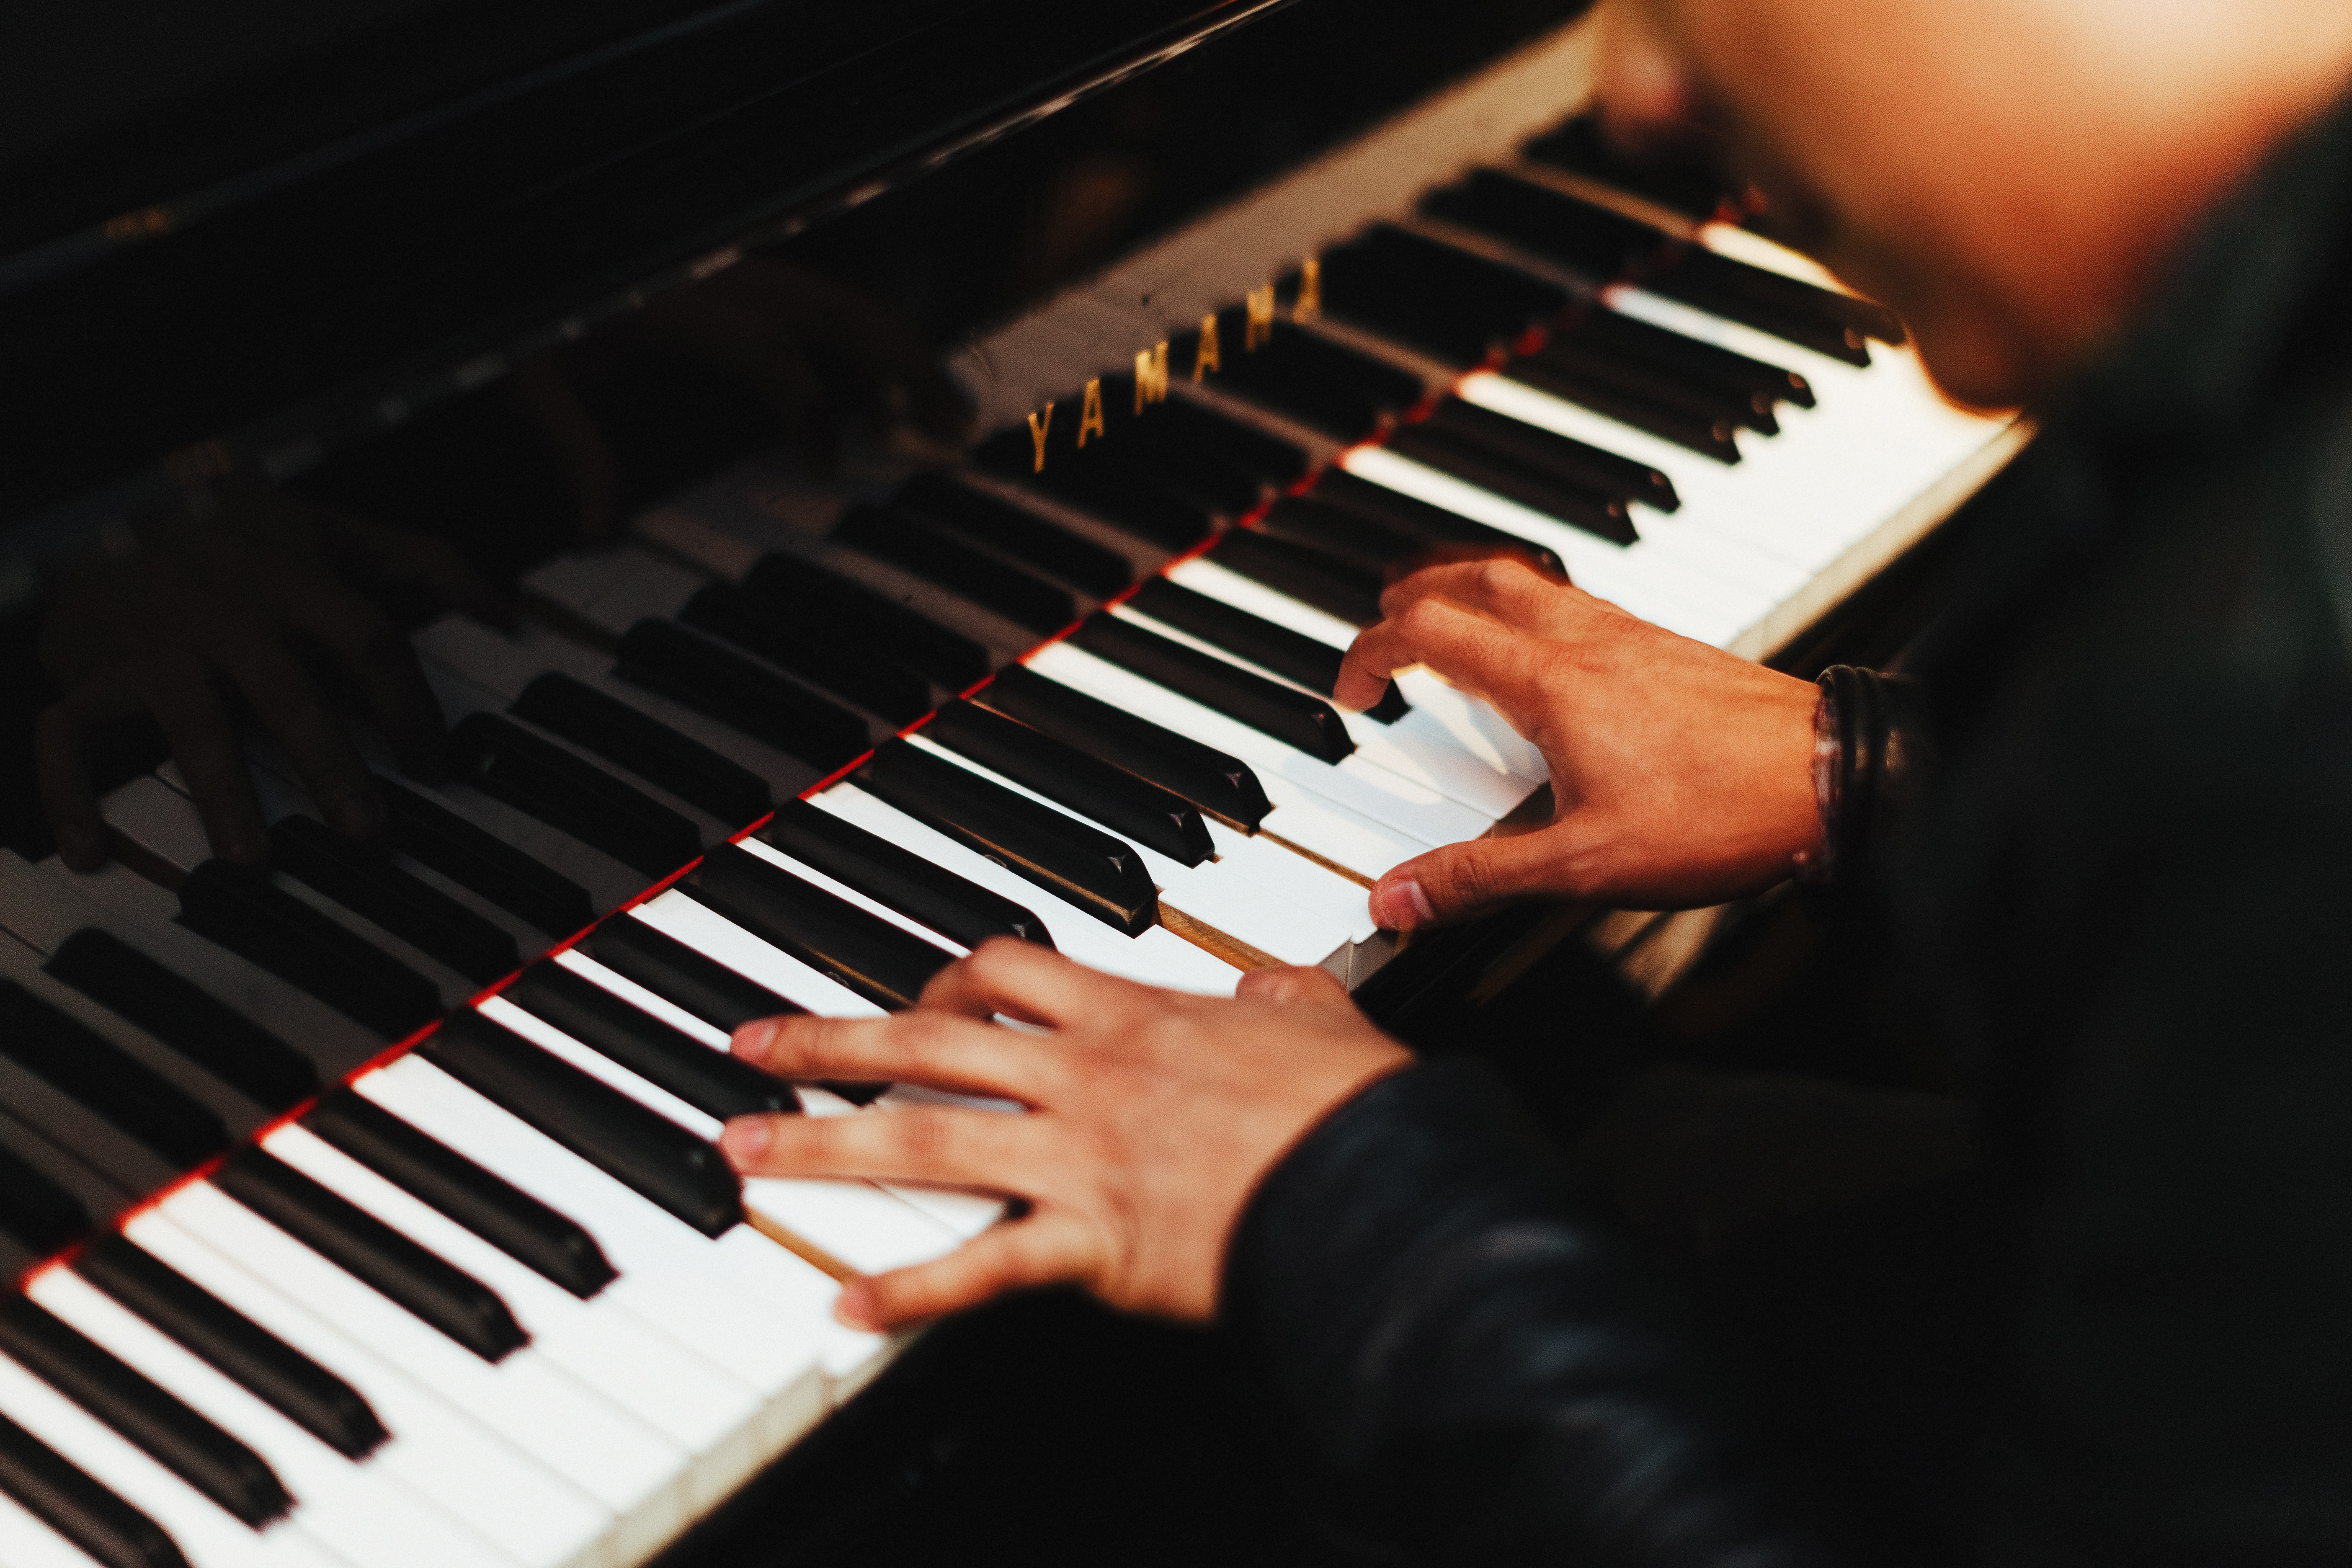 ‘IMAGINING’ PIANO PRACTICE BETTER THAN THE REAL THING